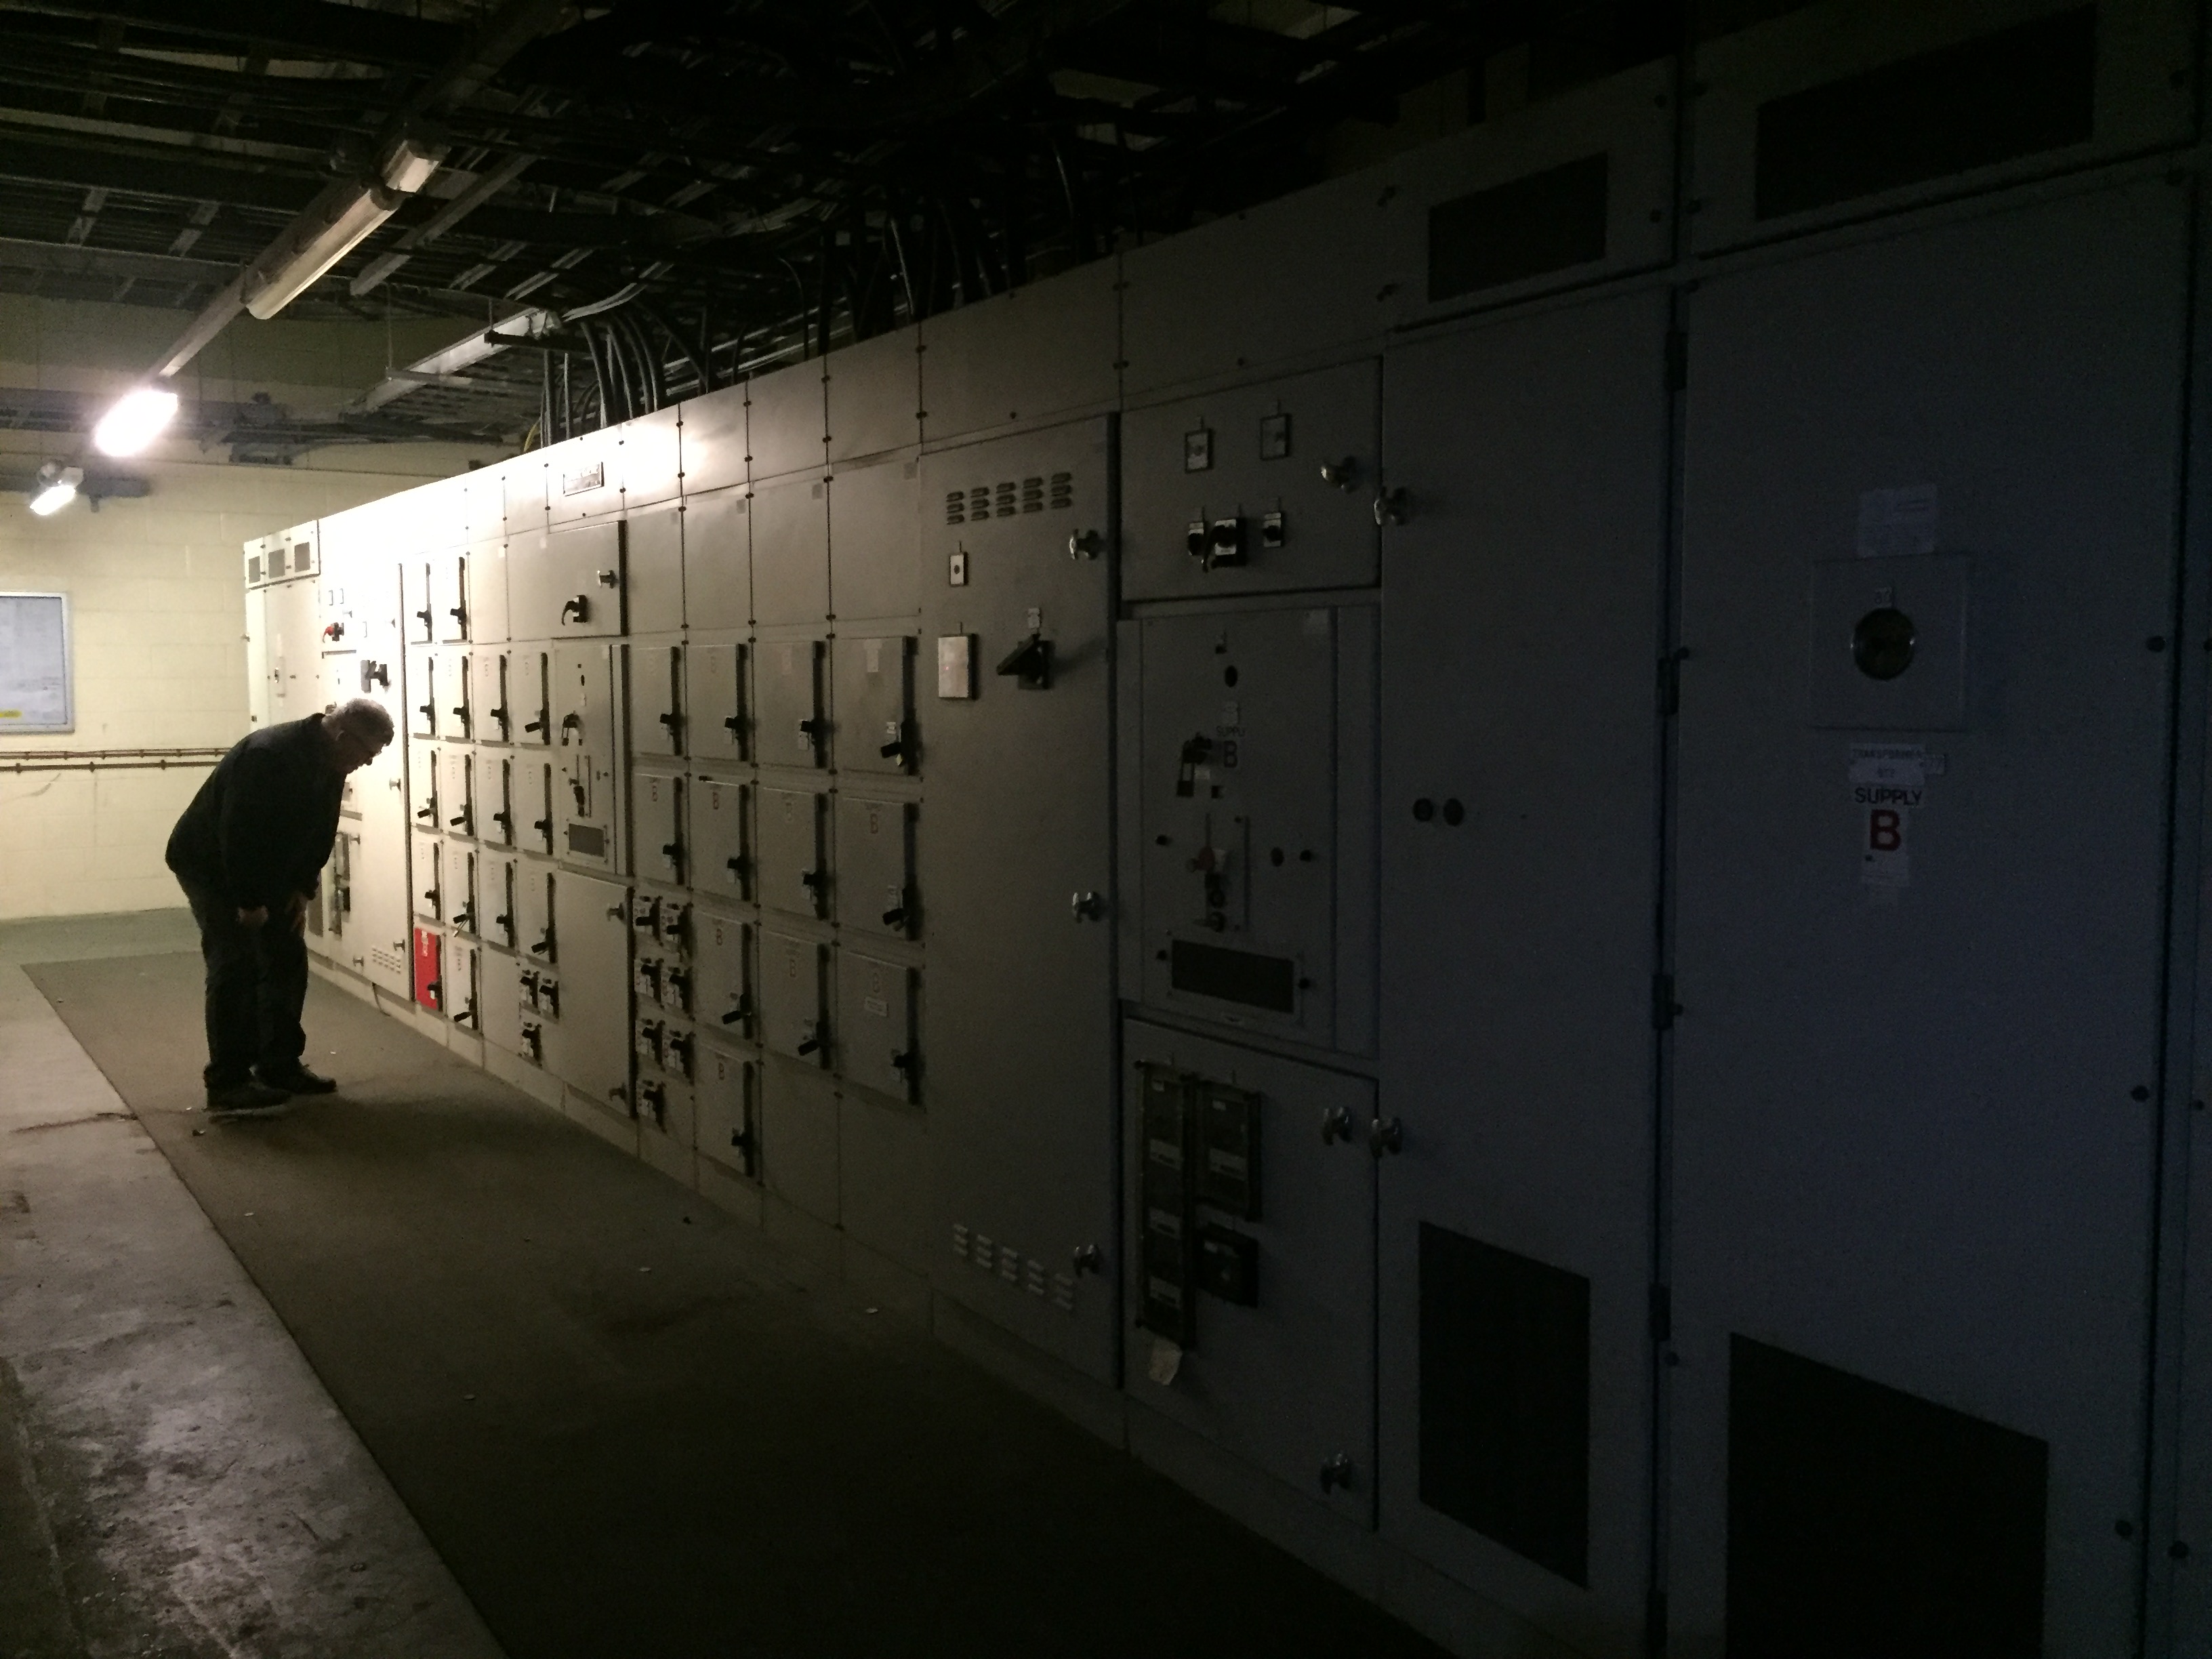 Investigation of source of supply at internal substation in industrial environment